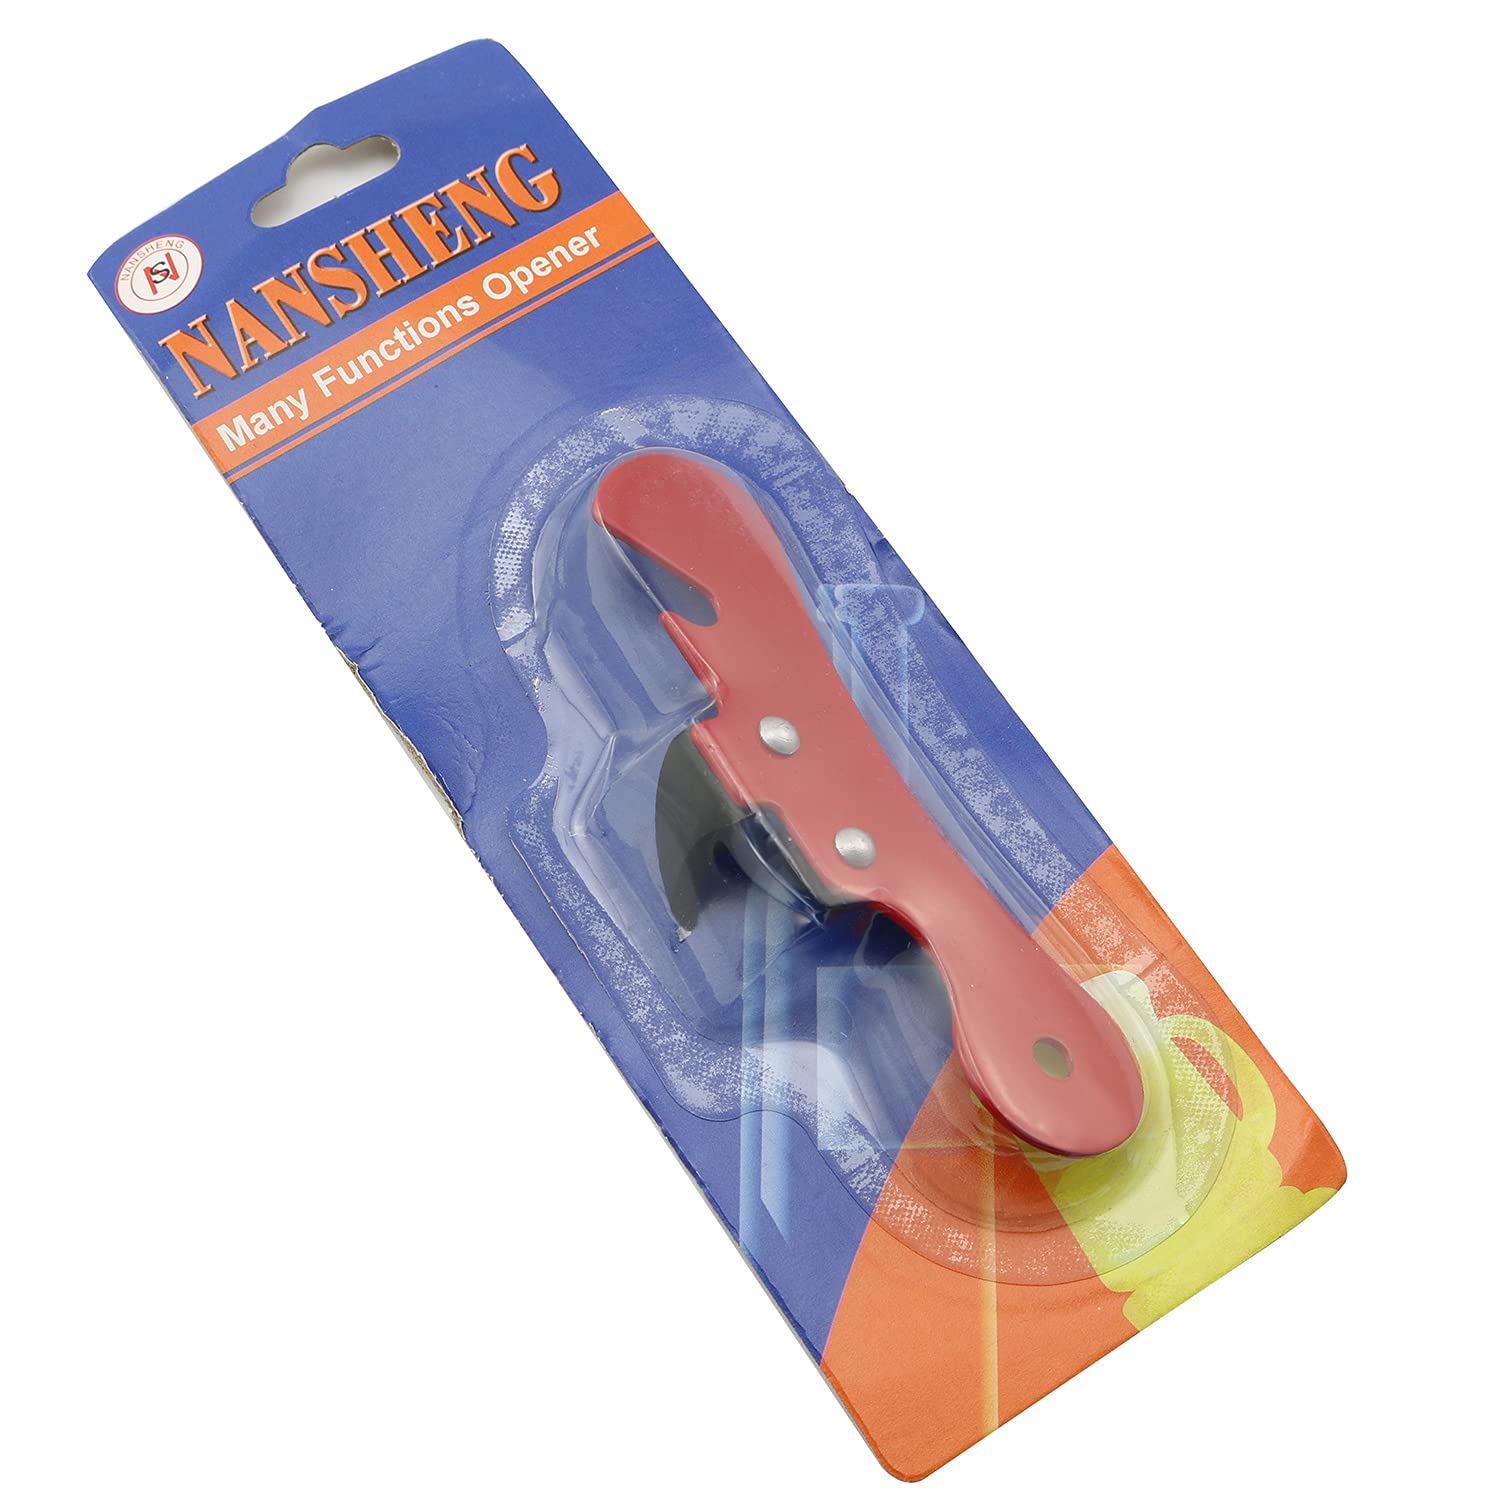 YYANGZ 1PC Manual Can Openers, Two-in-one Opening Tool, Handheld Camping Can and Bottle Openers, Can Openers